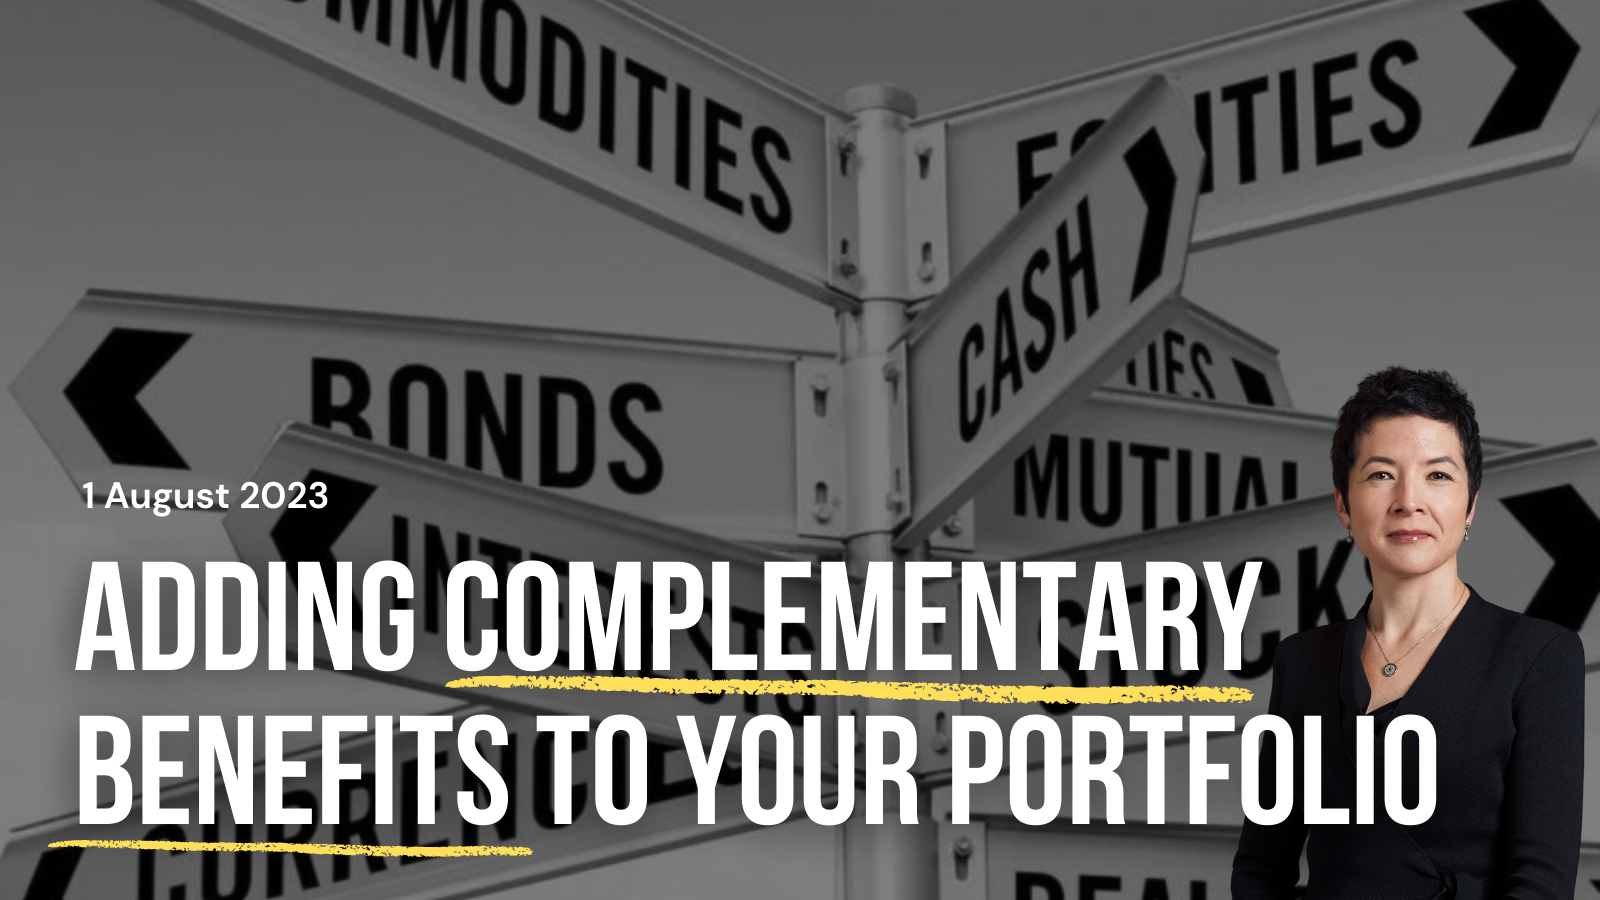 2. complementary benefits to your portfolio